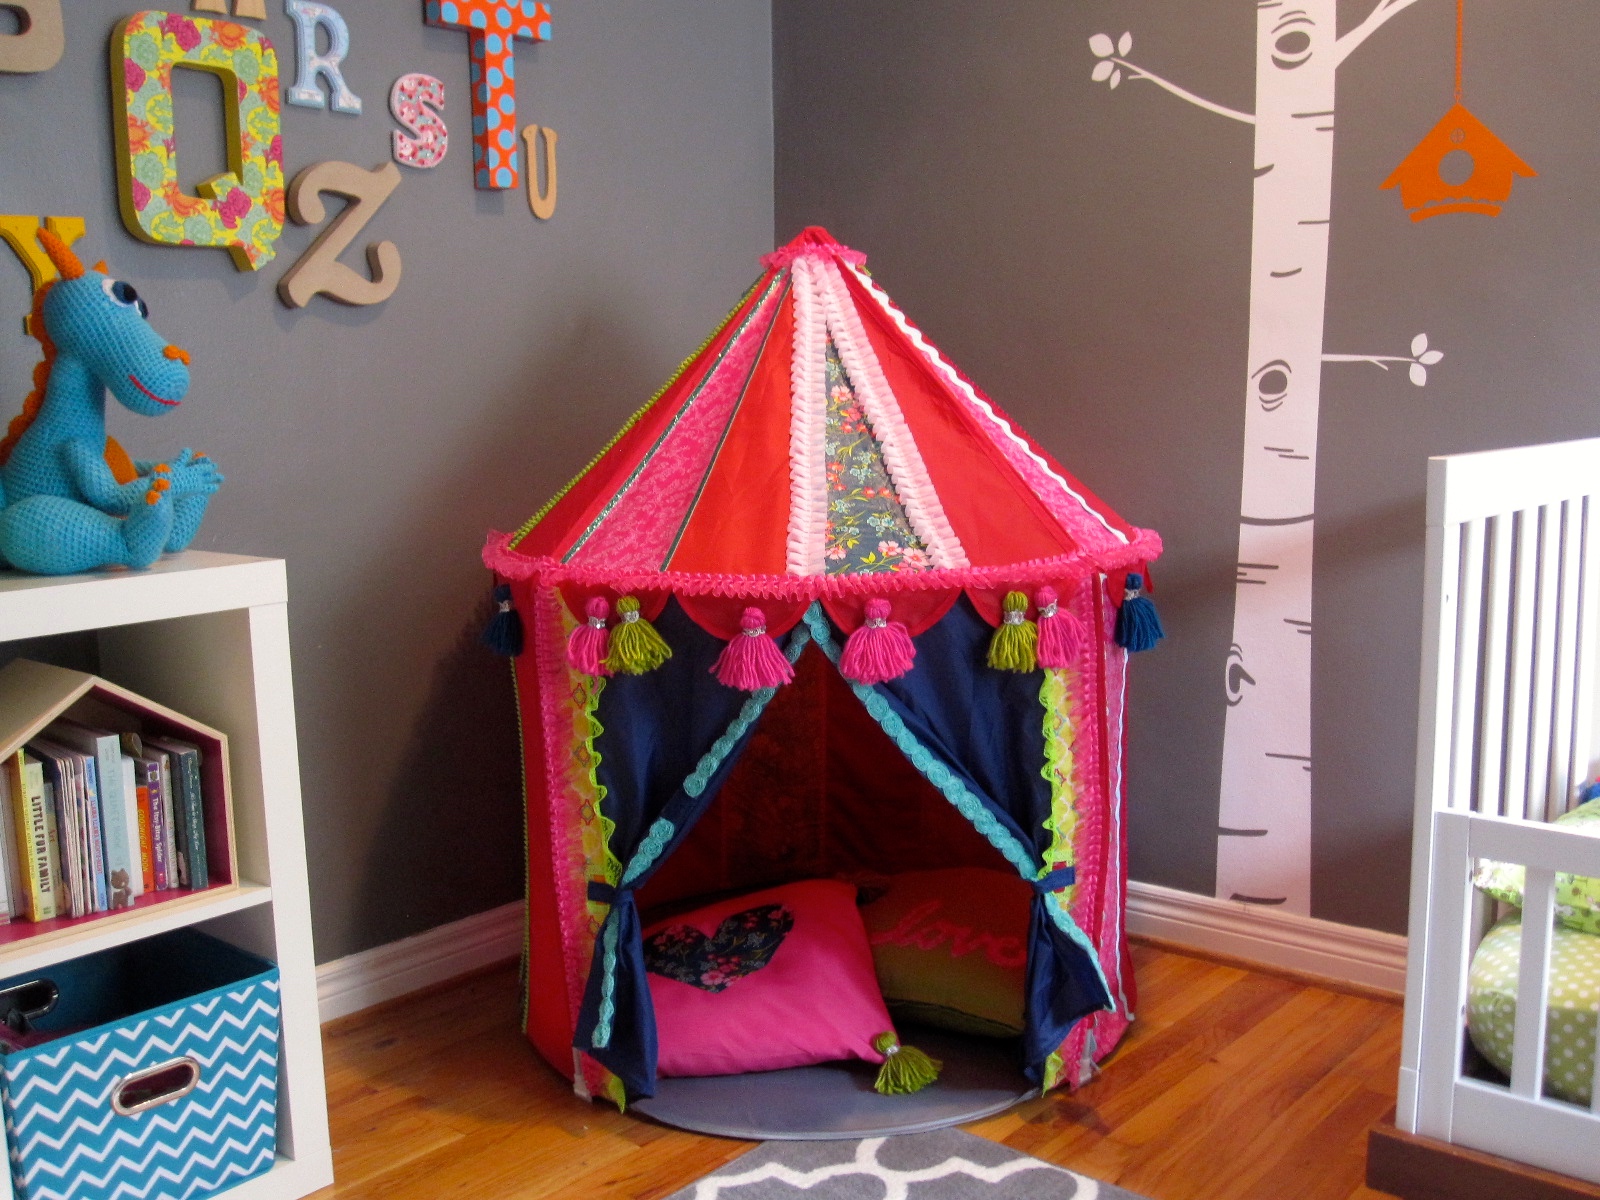 Rating of the best children's play tents and houses for 2022